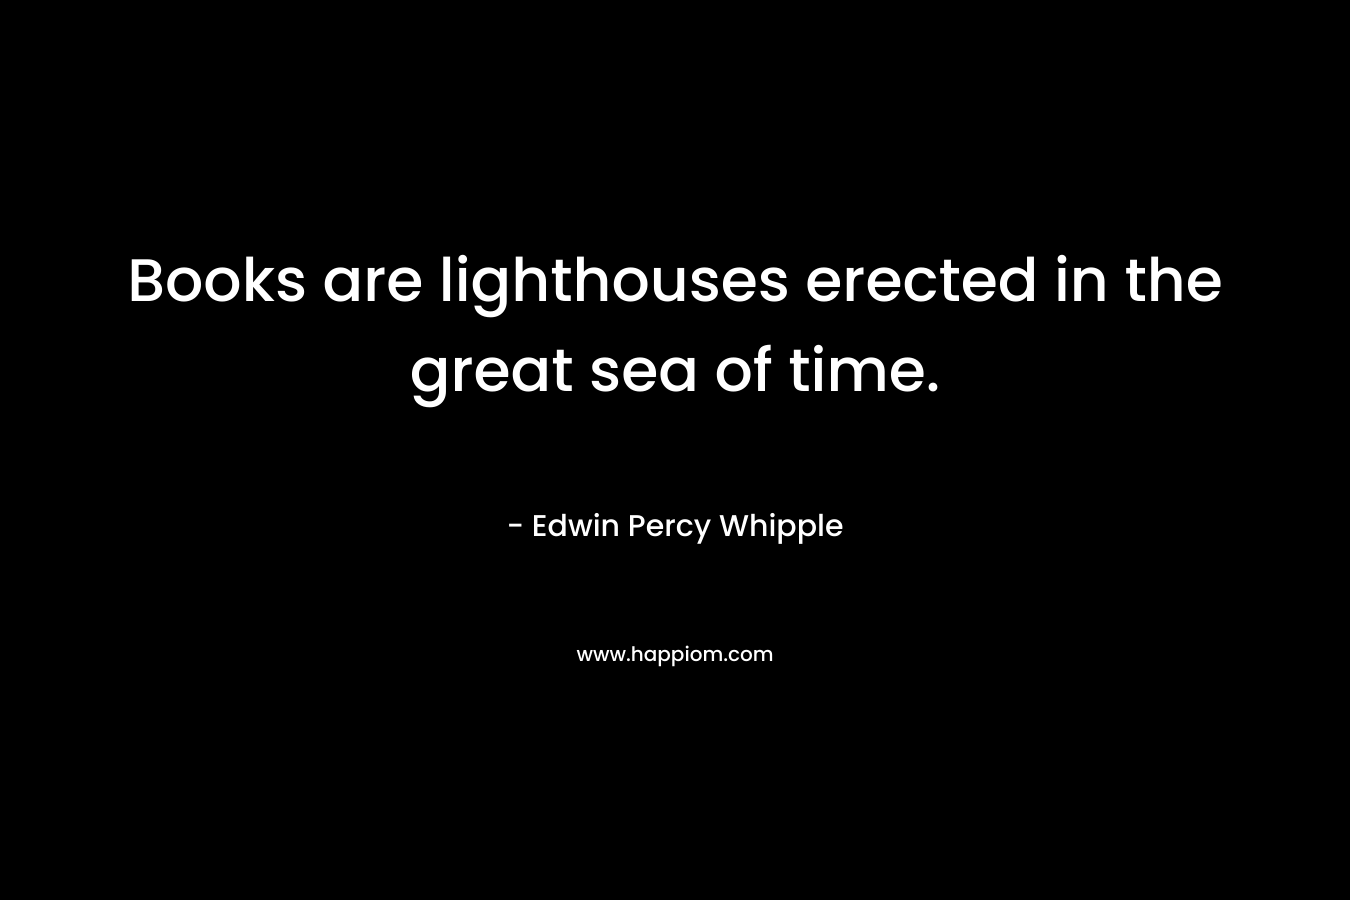 Books are lighthouses erected in the great sea of time.